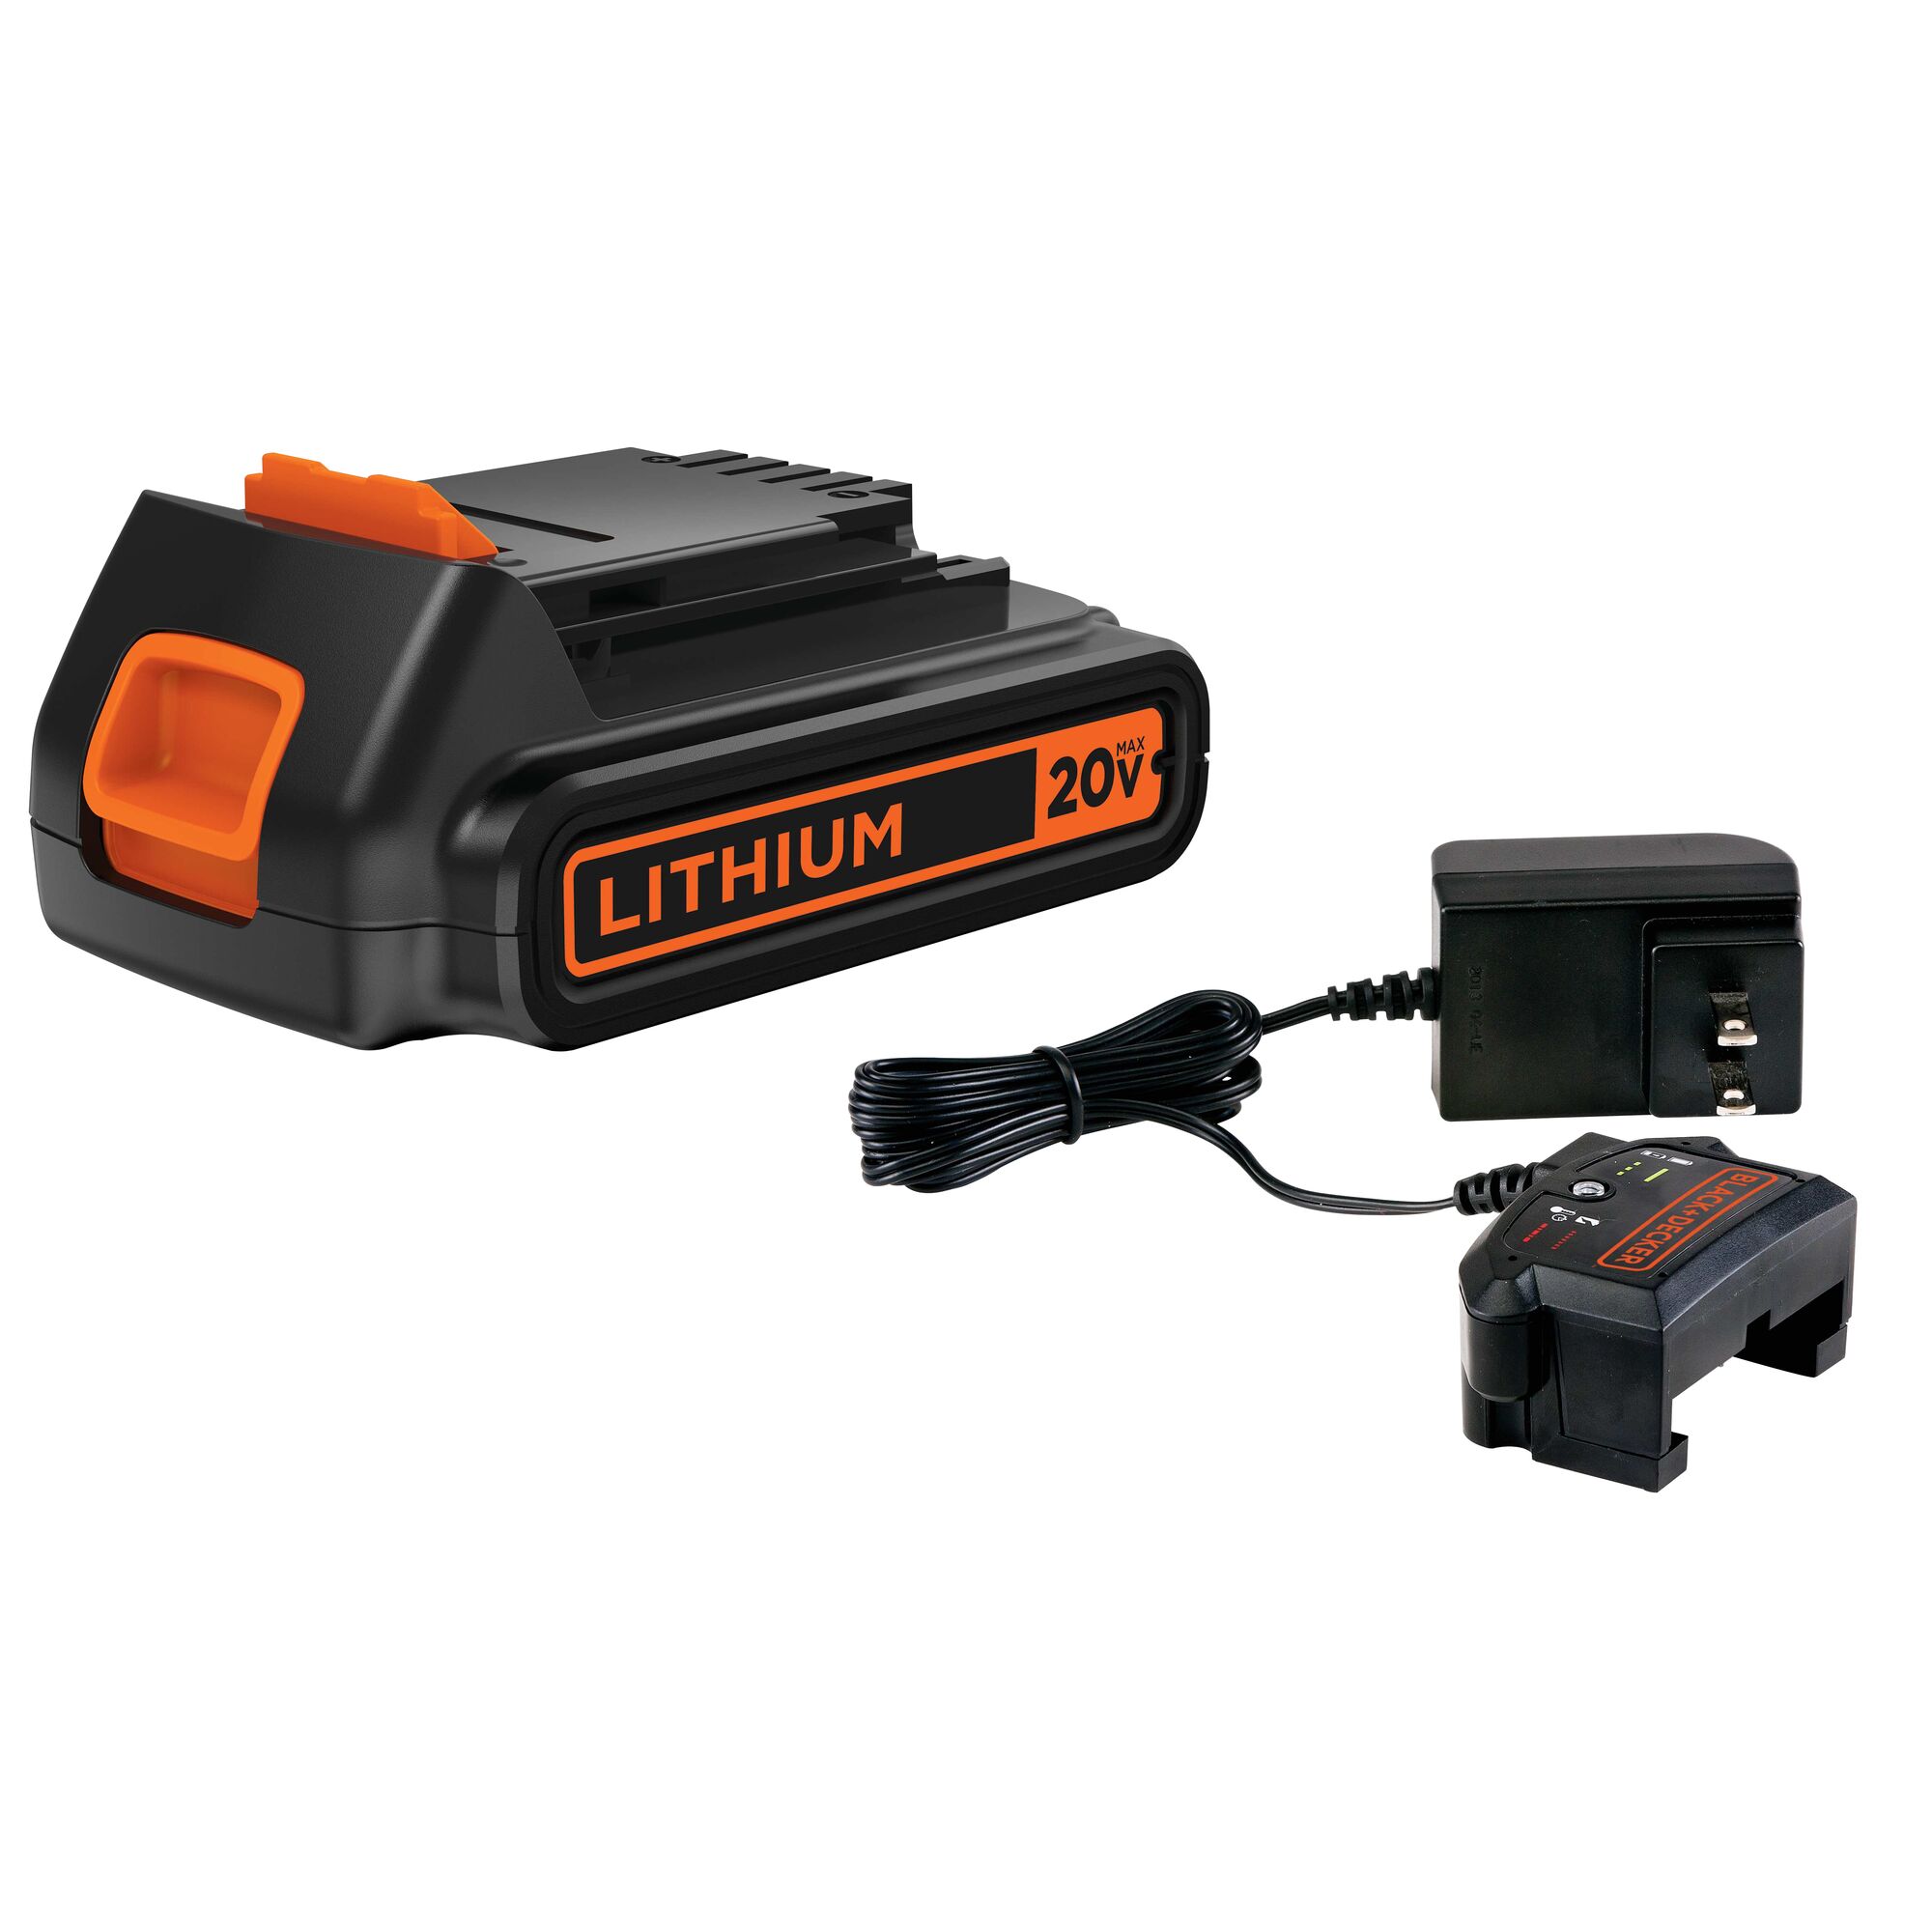 20 volt MAX lithium ion battery plus charger.